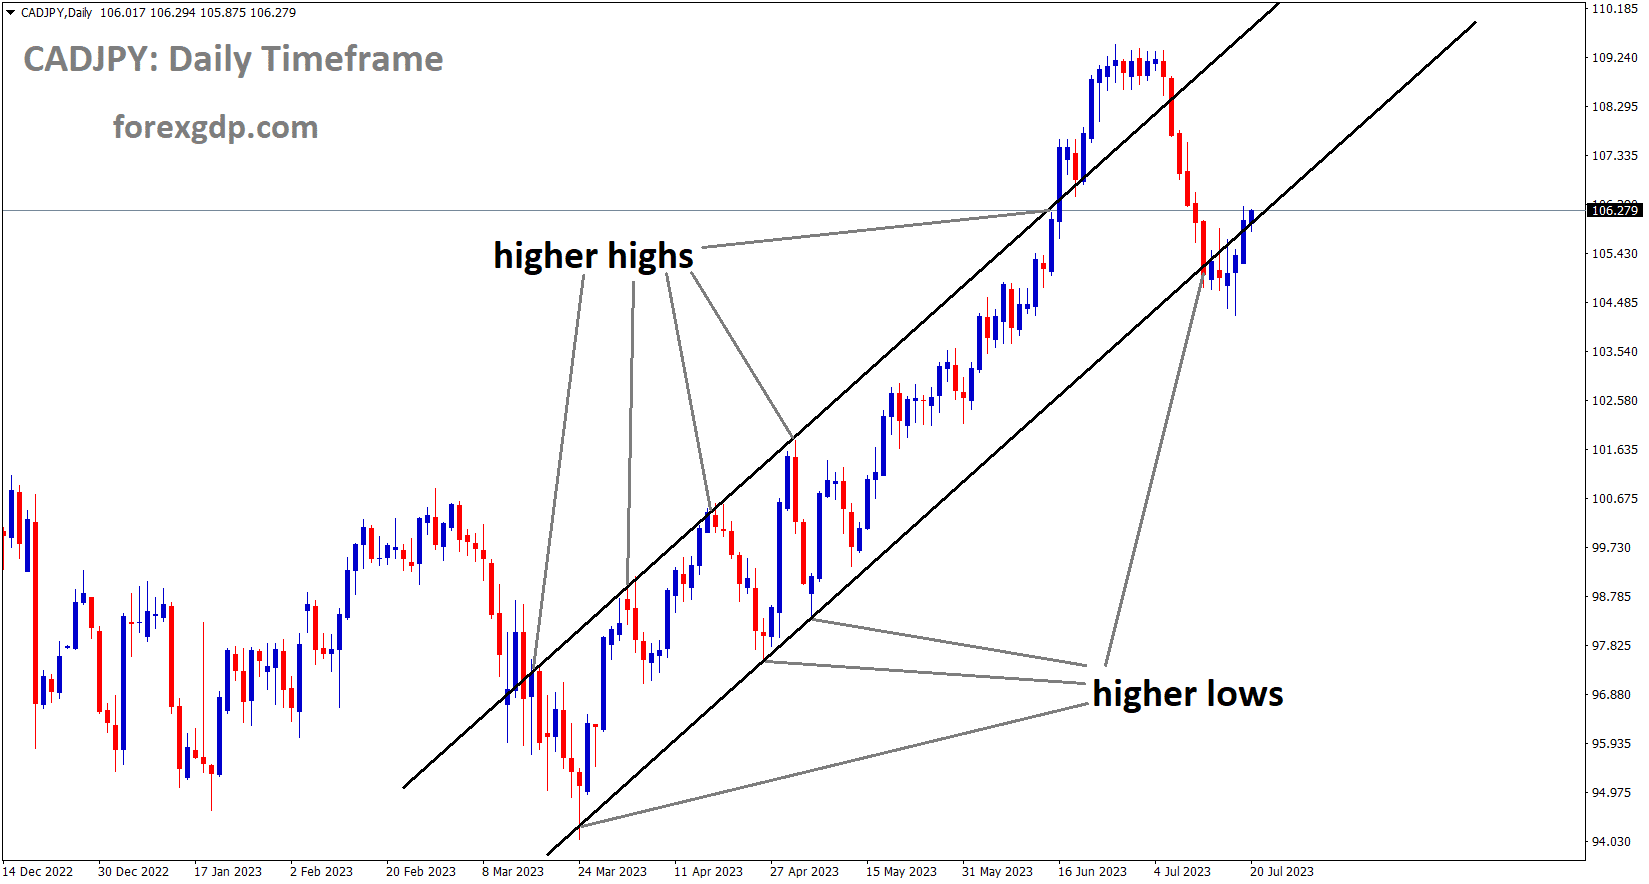 CADJPY is moving in an Ascending channel and the market has rebounded from the higher low area of the channel